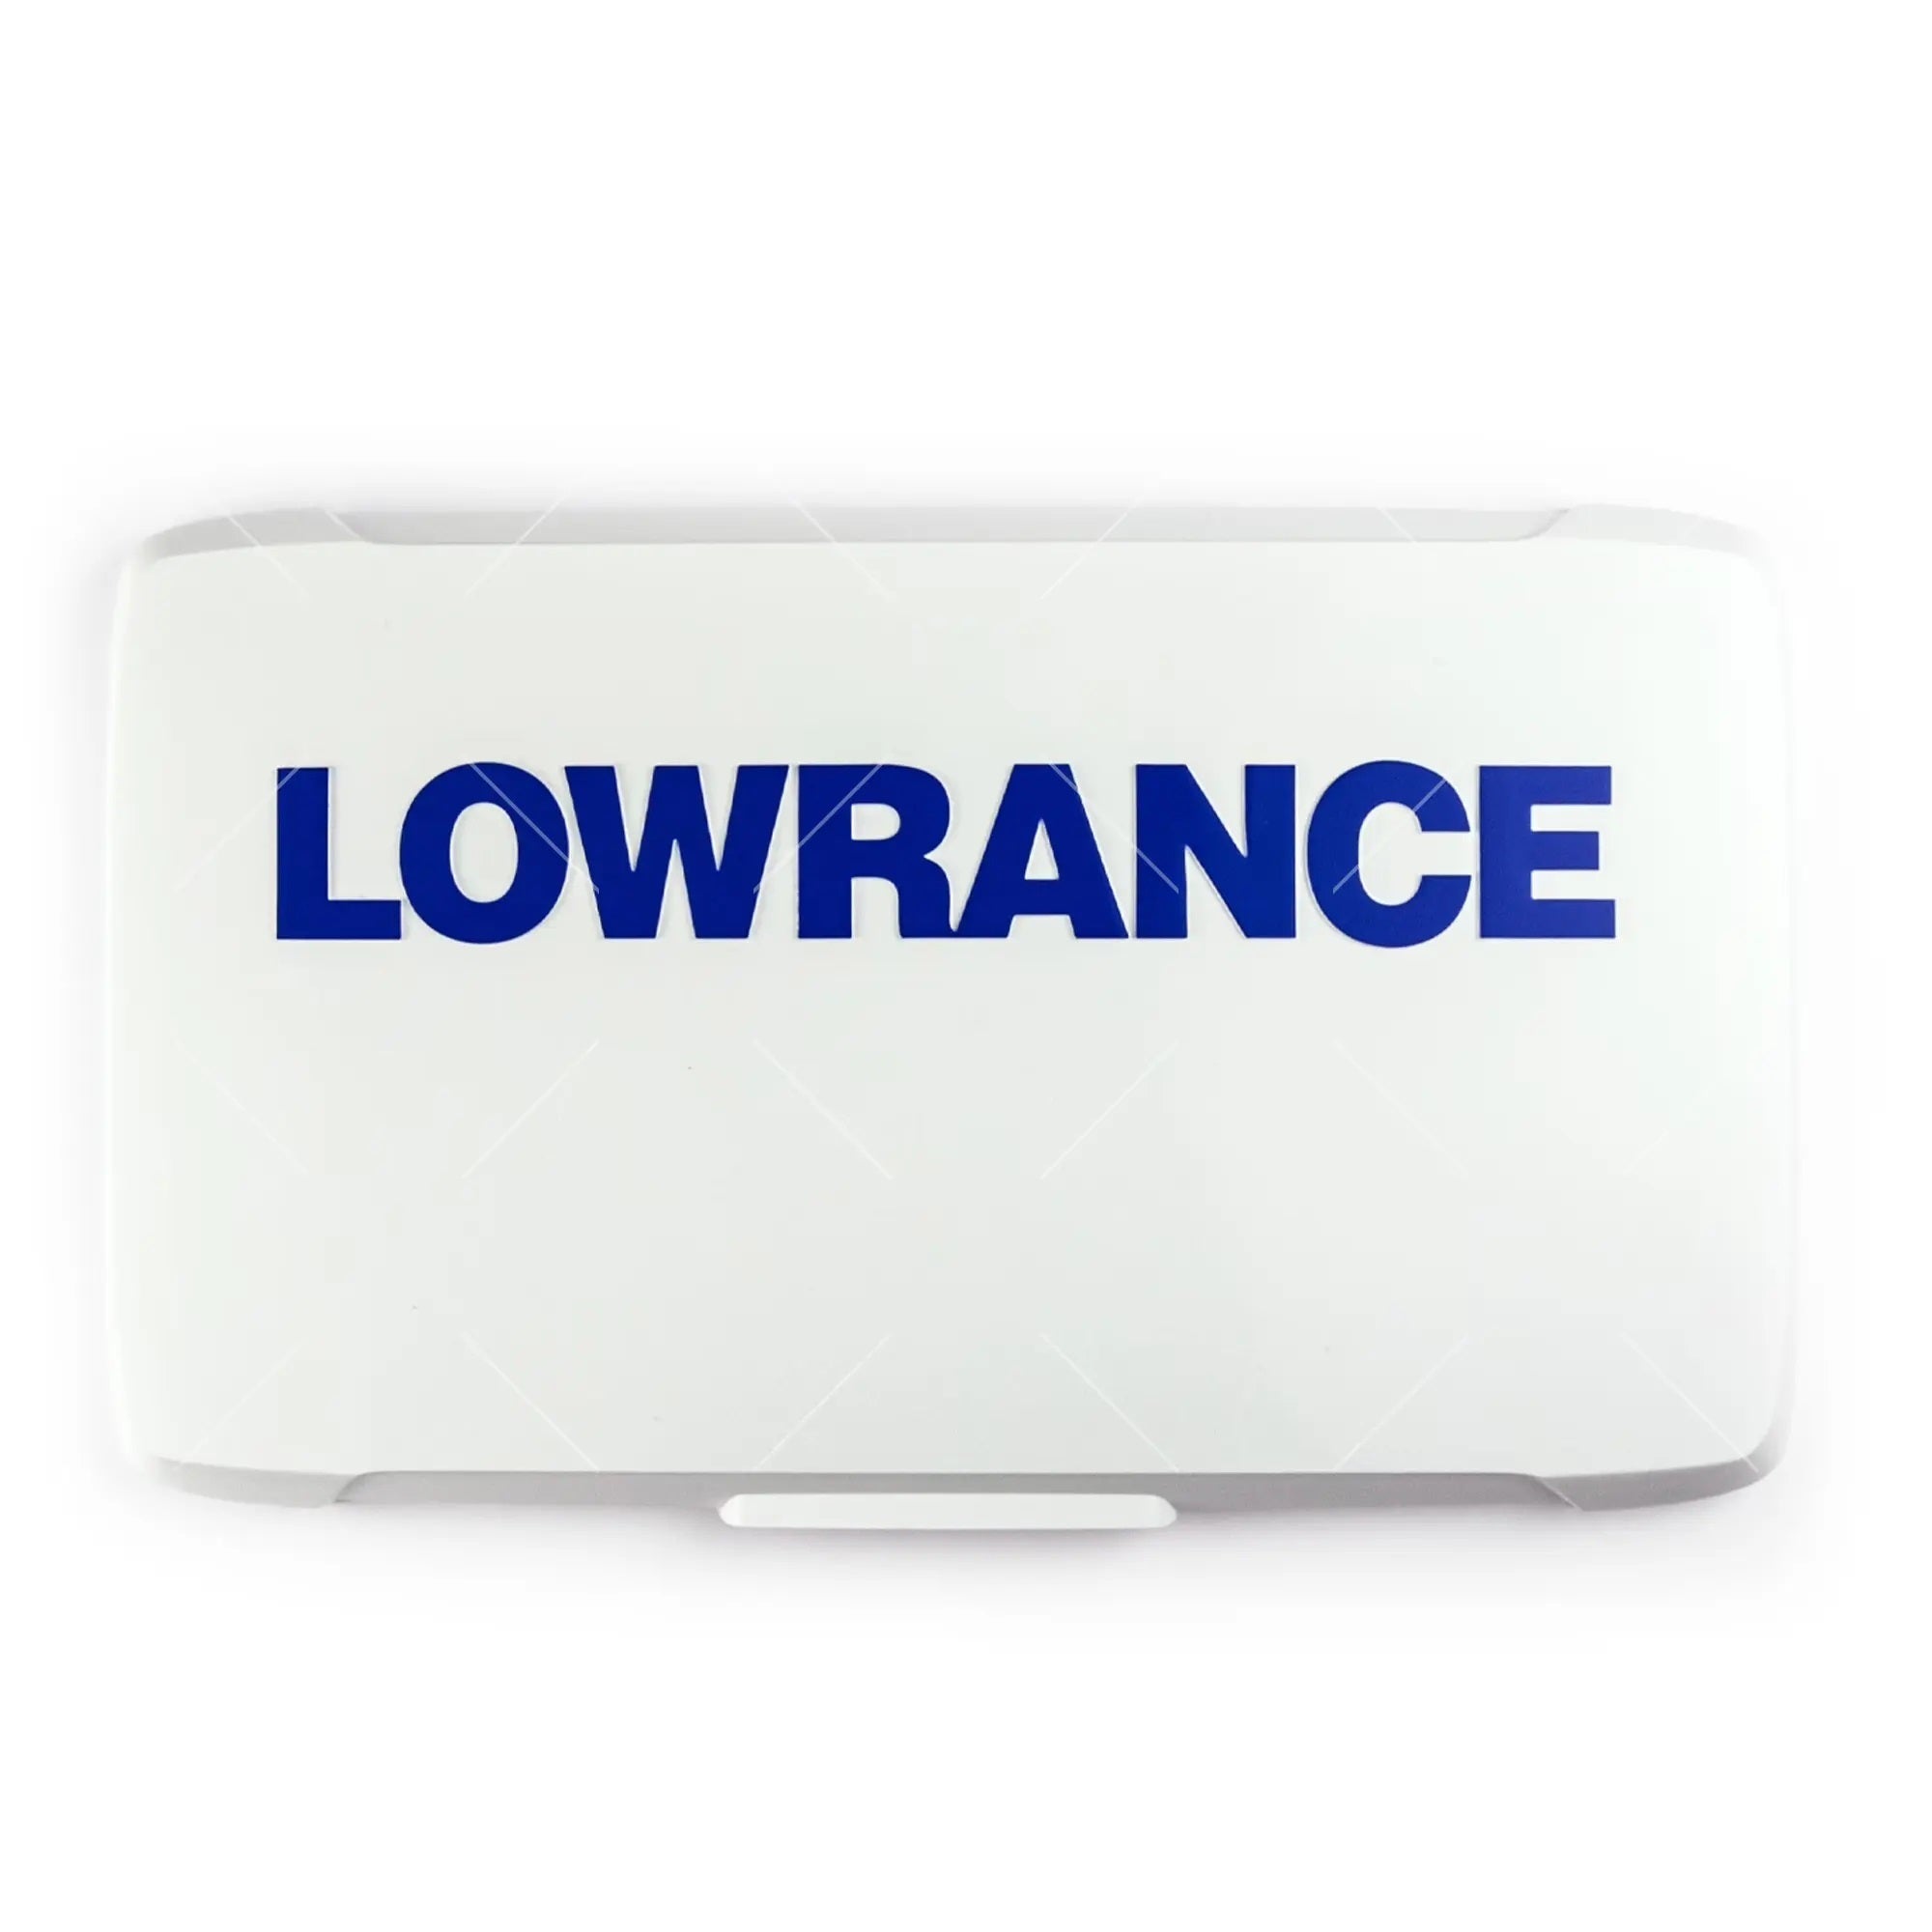 Lowrance 000-16251-001 Sun Cover for Eagle 9